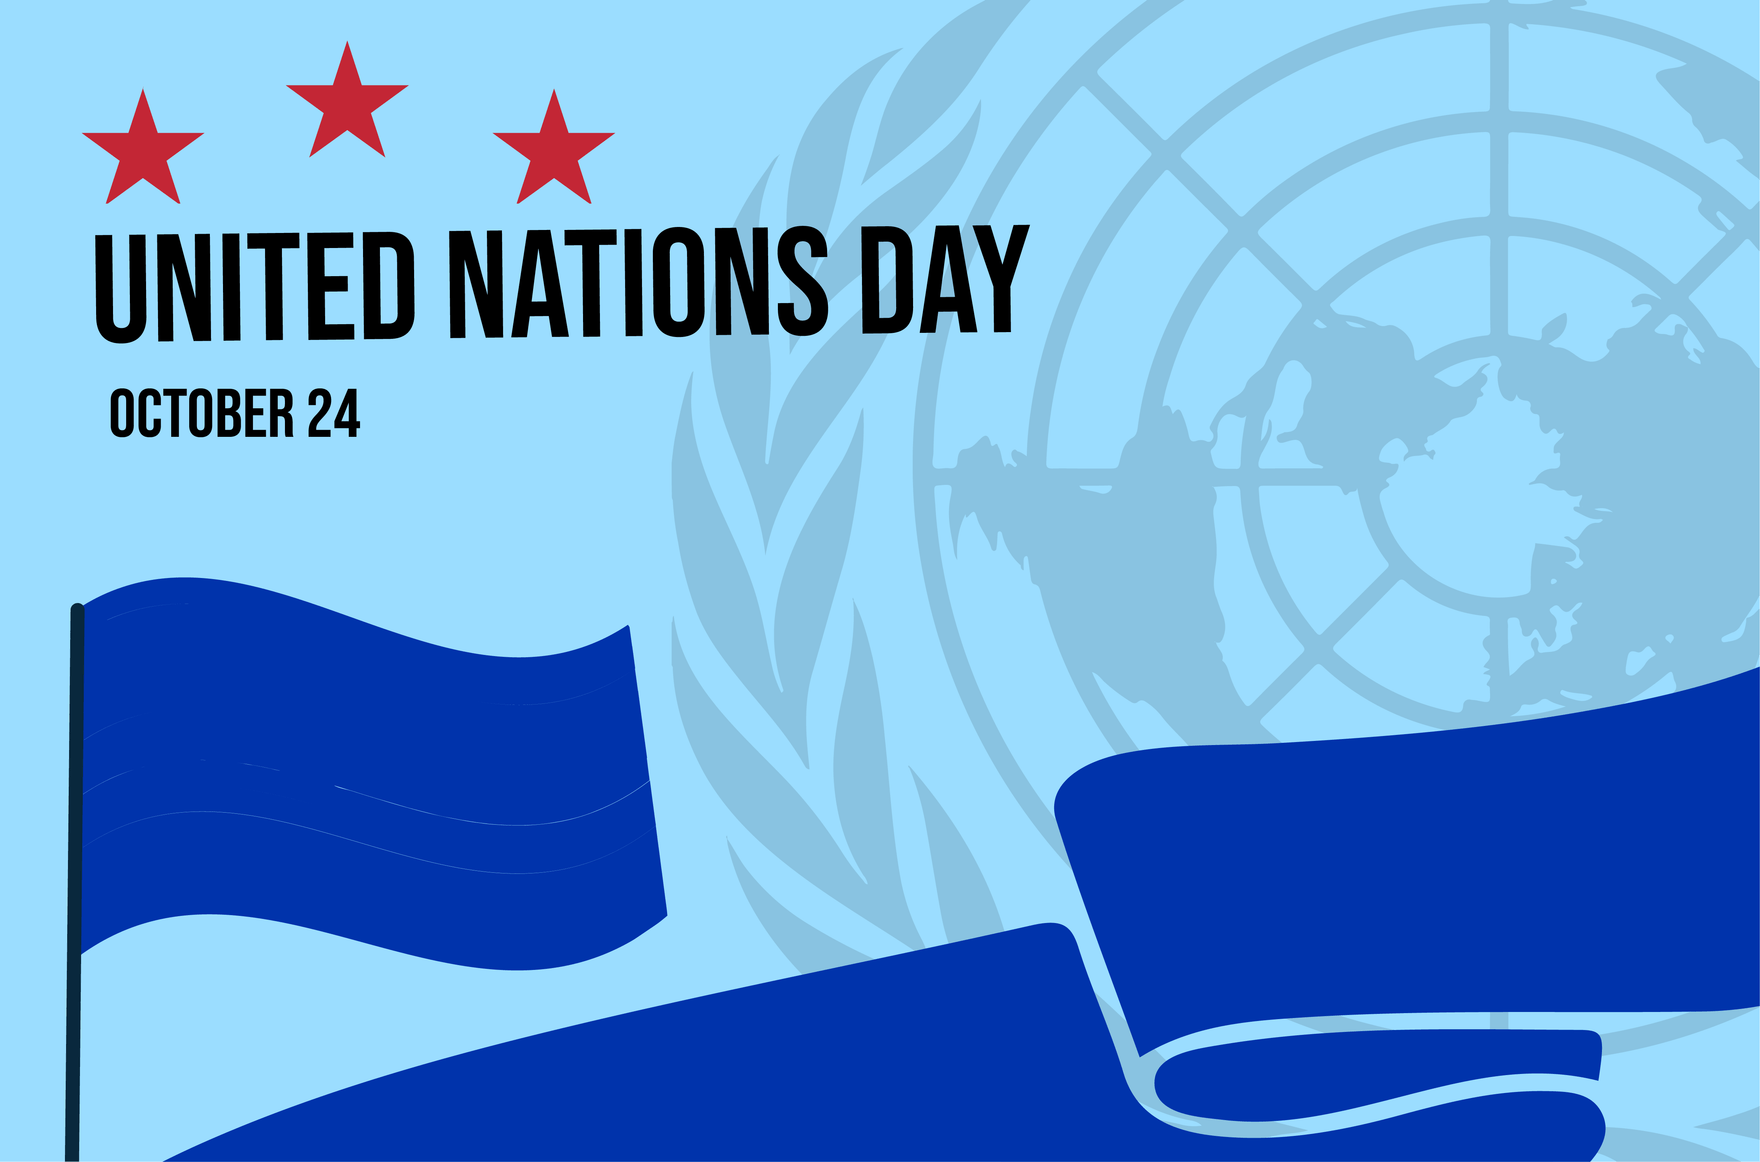 United Nations Day Background - Images, HD, Free, Download 